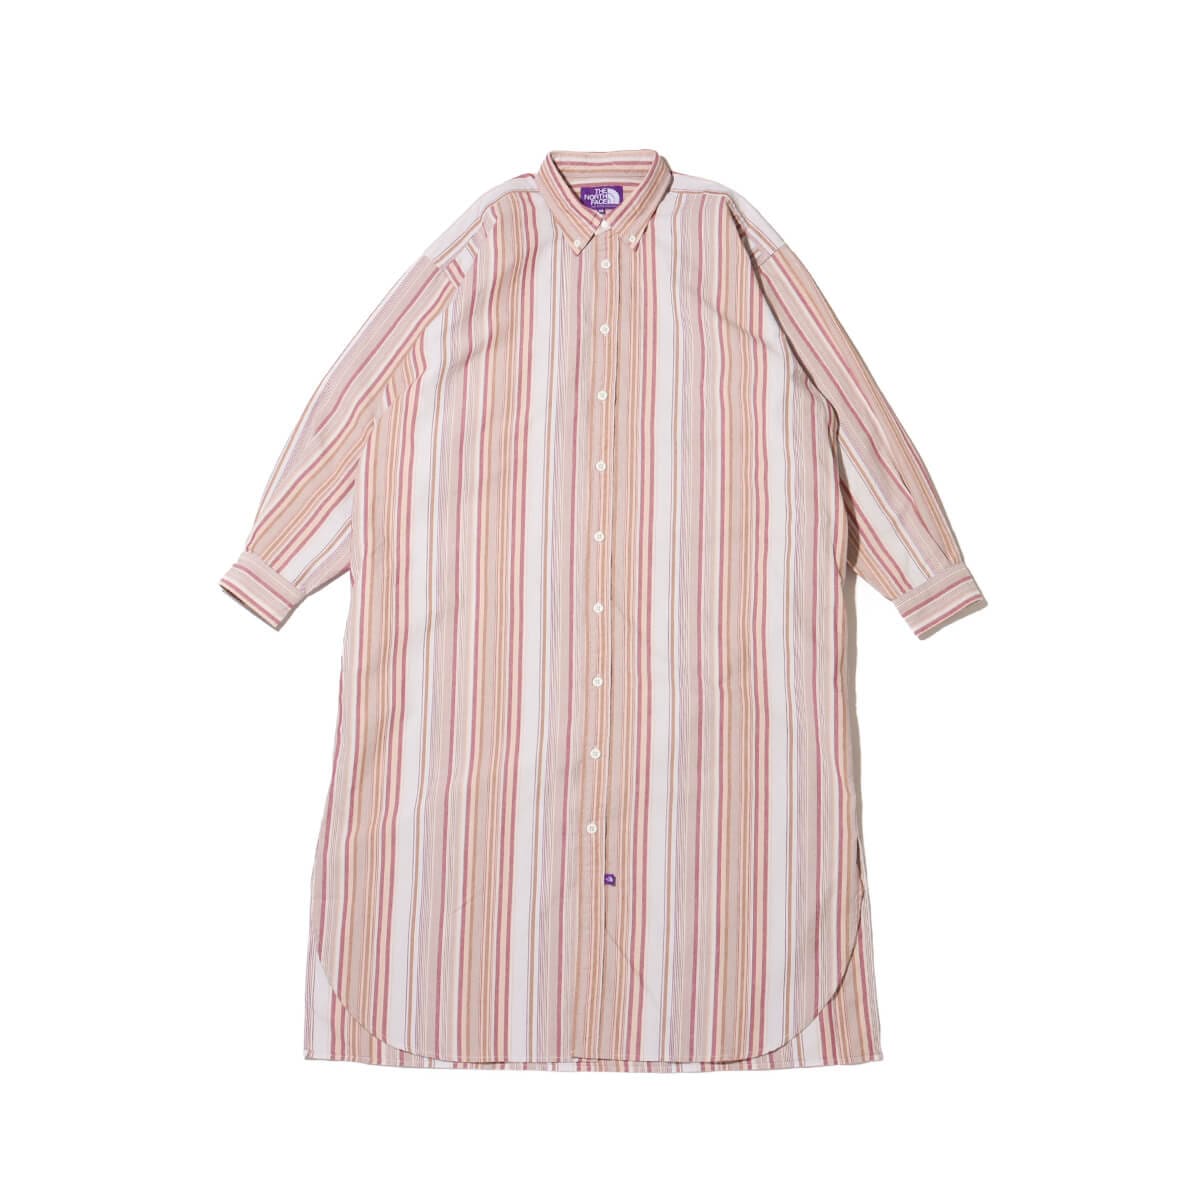 THE NORTH FACE PURPLE LABEL Button Down NP Striped Field Shirt 